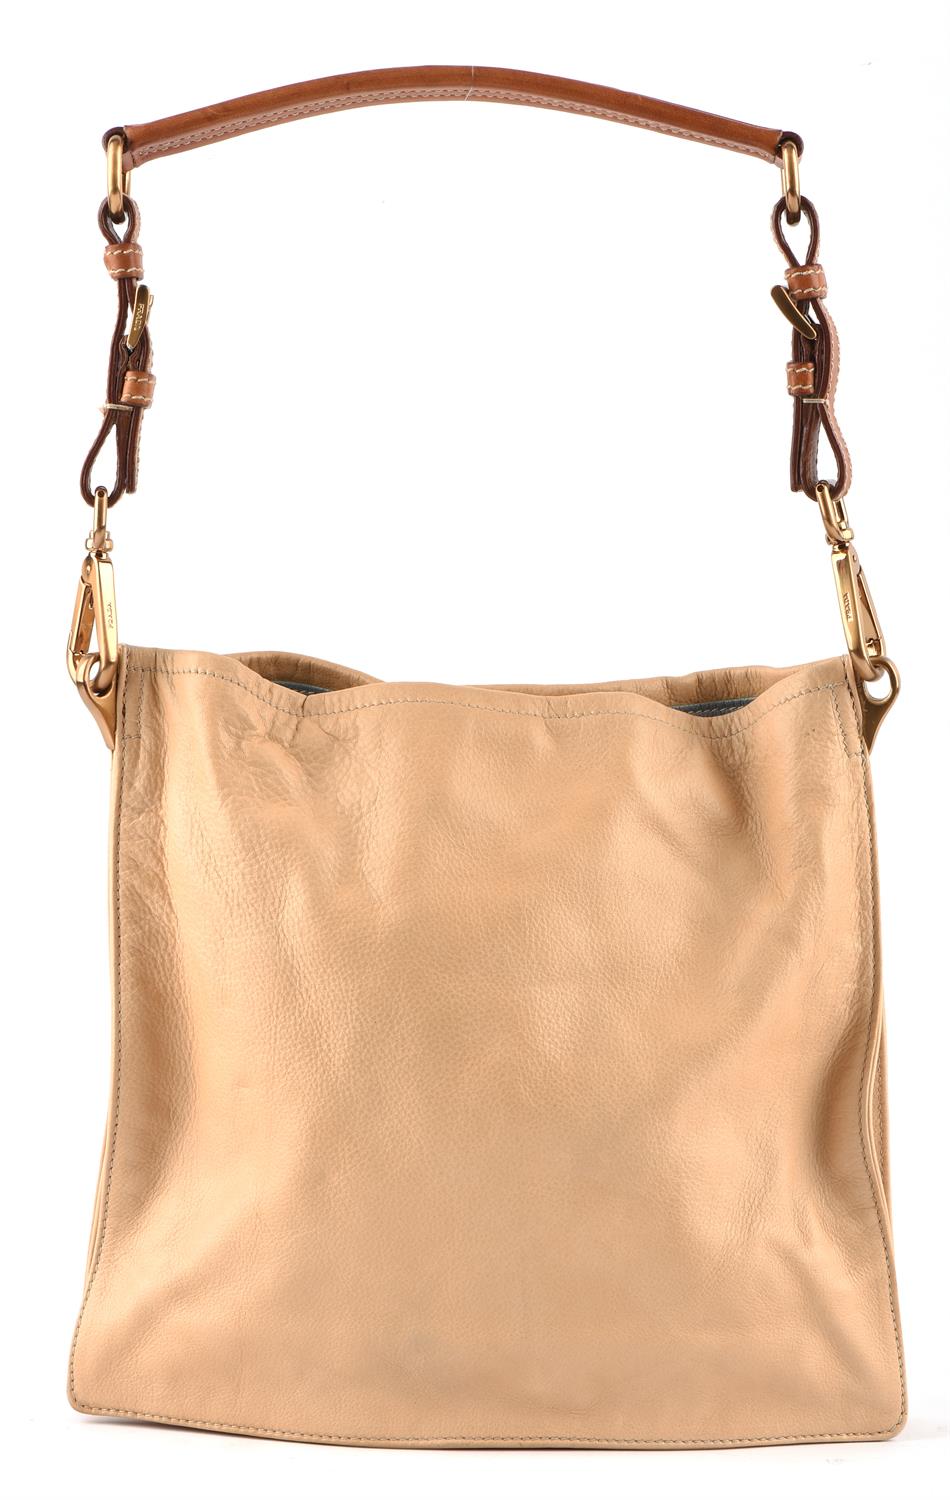 PRADA 1990s light tan square leather bag with baby blue leather lining. With gold coloured hardware - Image 3 of 4